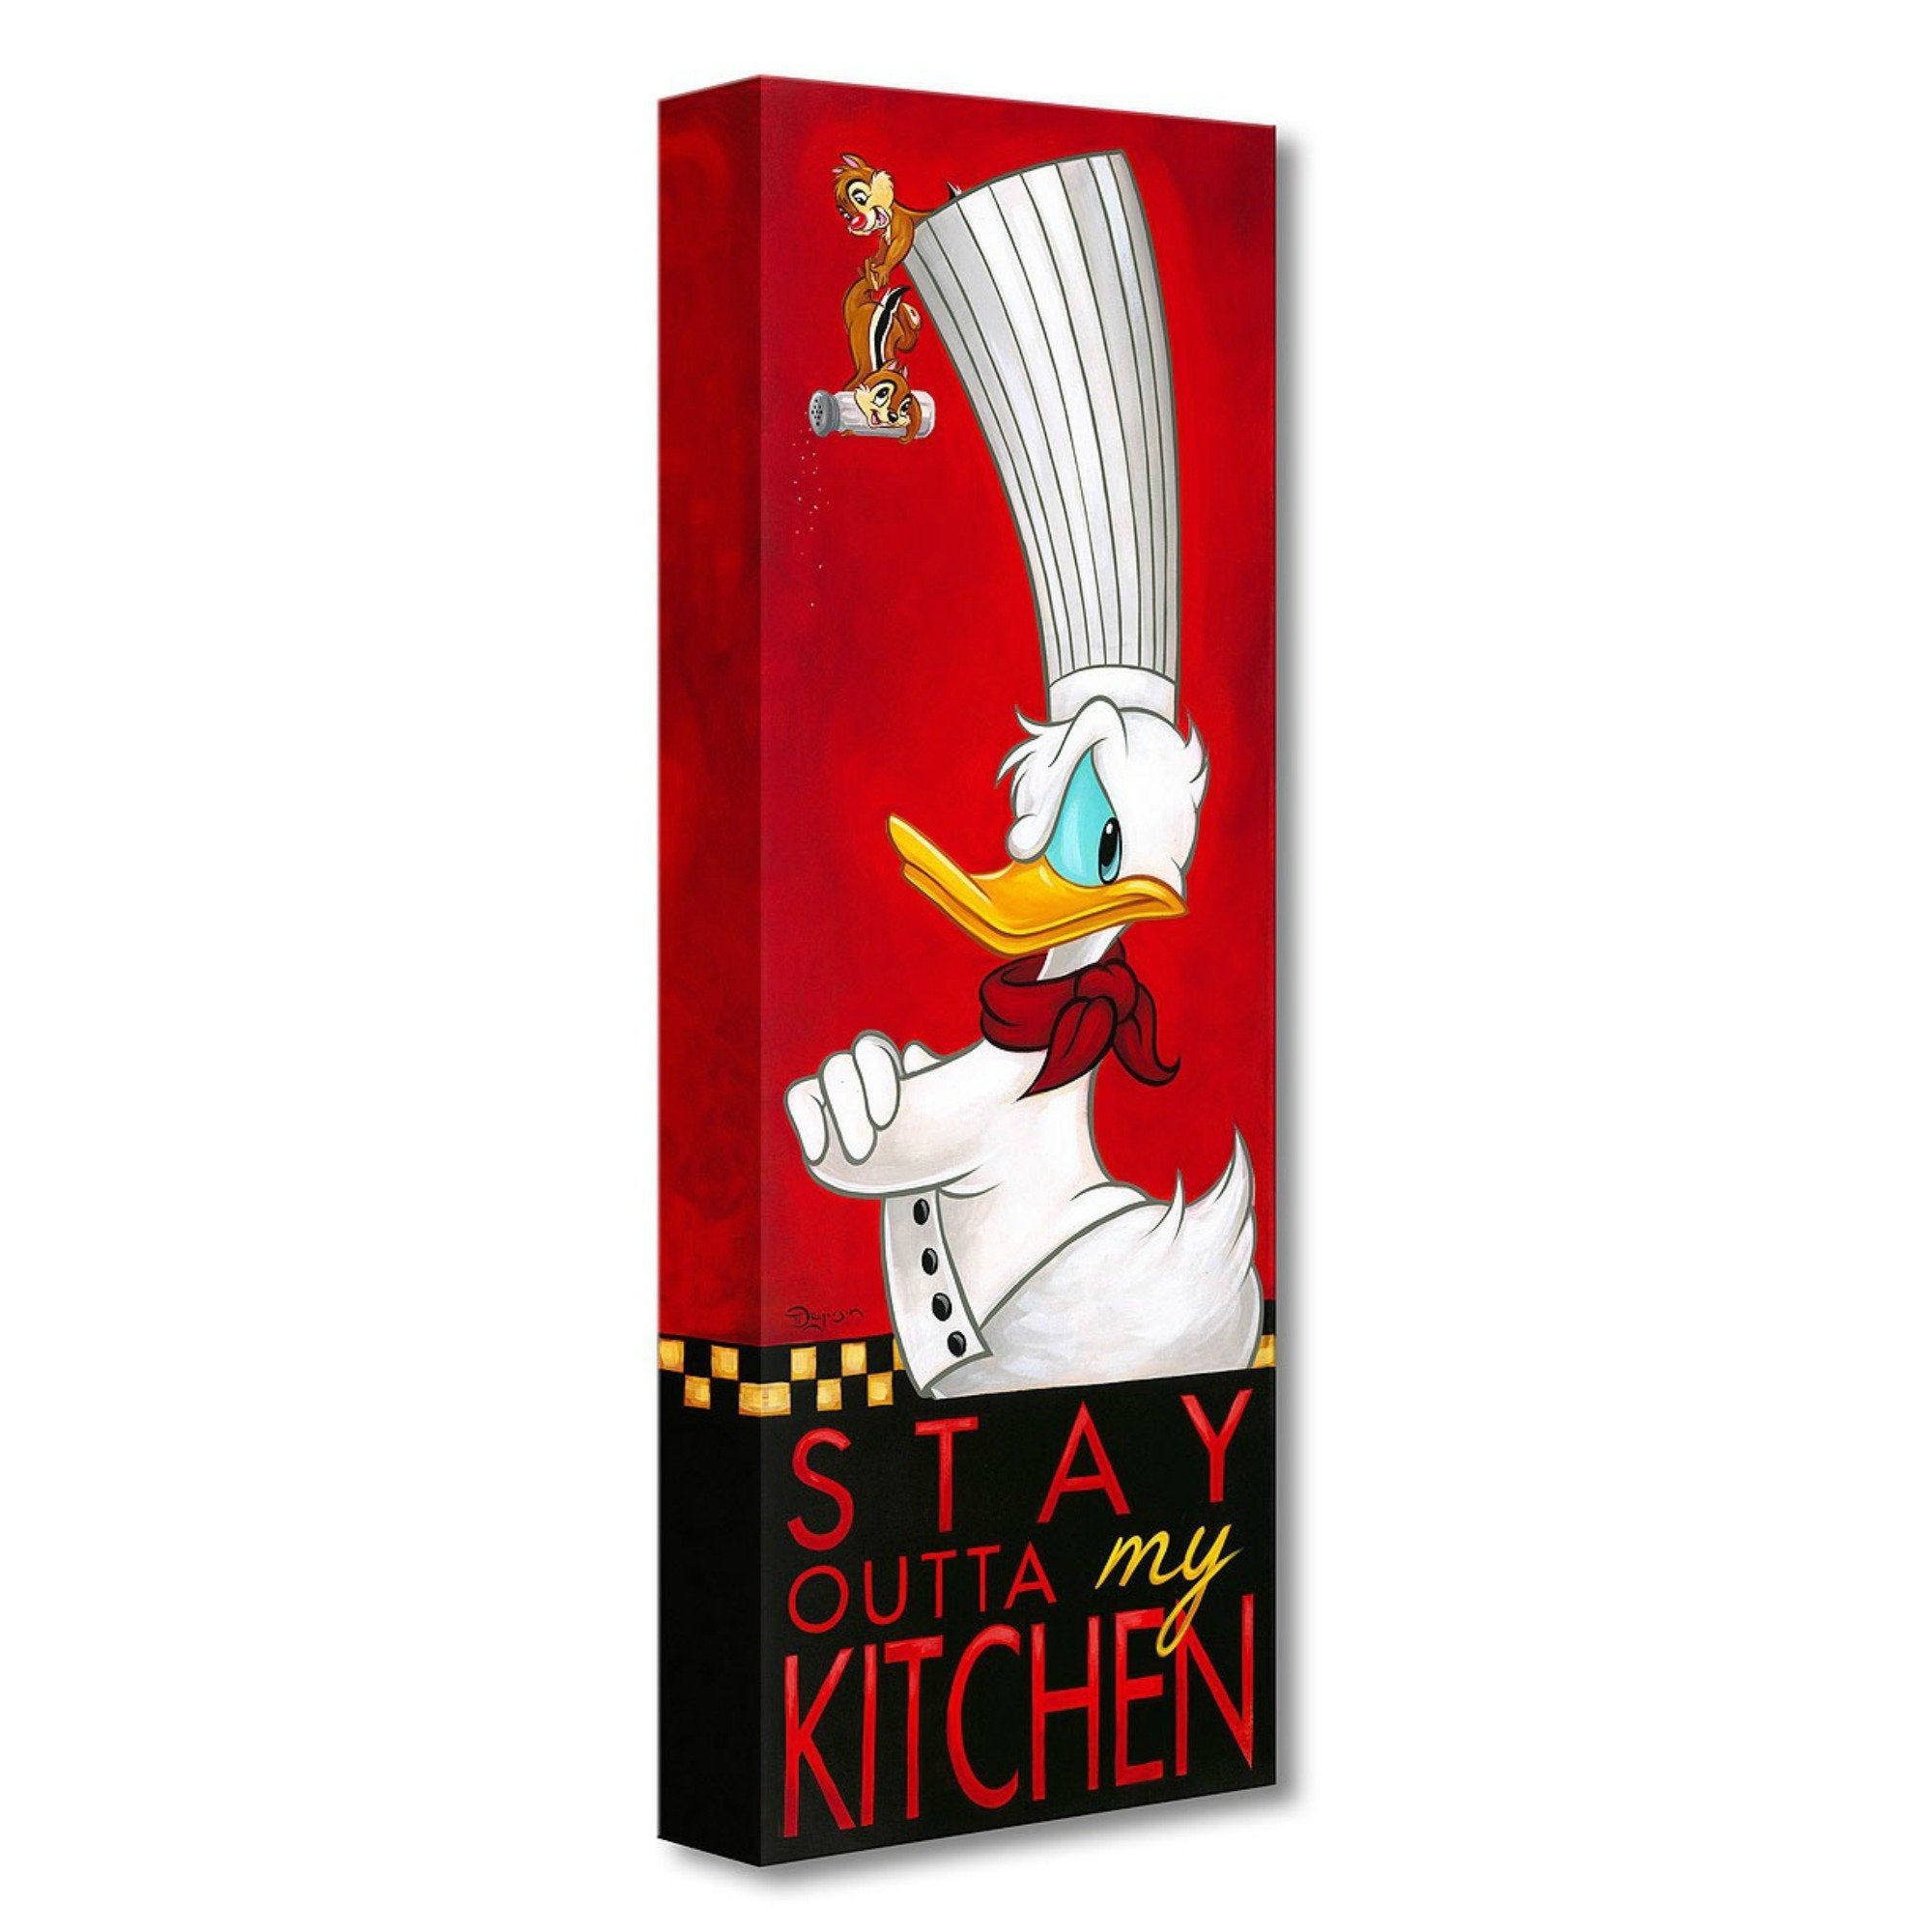 Stay Outta My Kitchen by Tim Rogerson  Chef Donald has a serious look with his armed crossed in this billboard style cameo pose...a closer look you will spot Chip and Dale hunging from on top of Donald's chef hat holding a salt shaker.